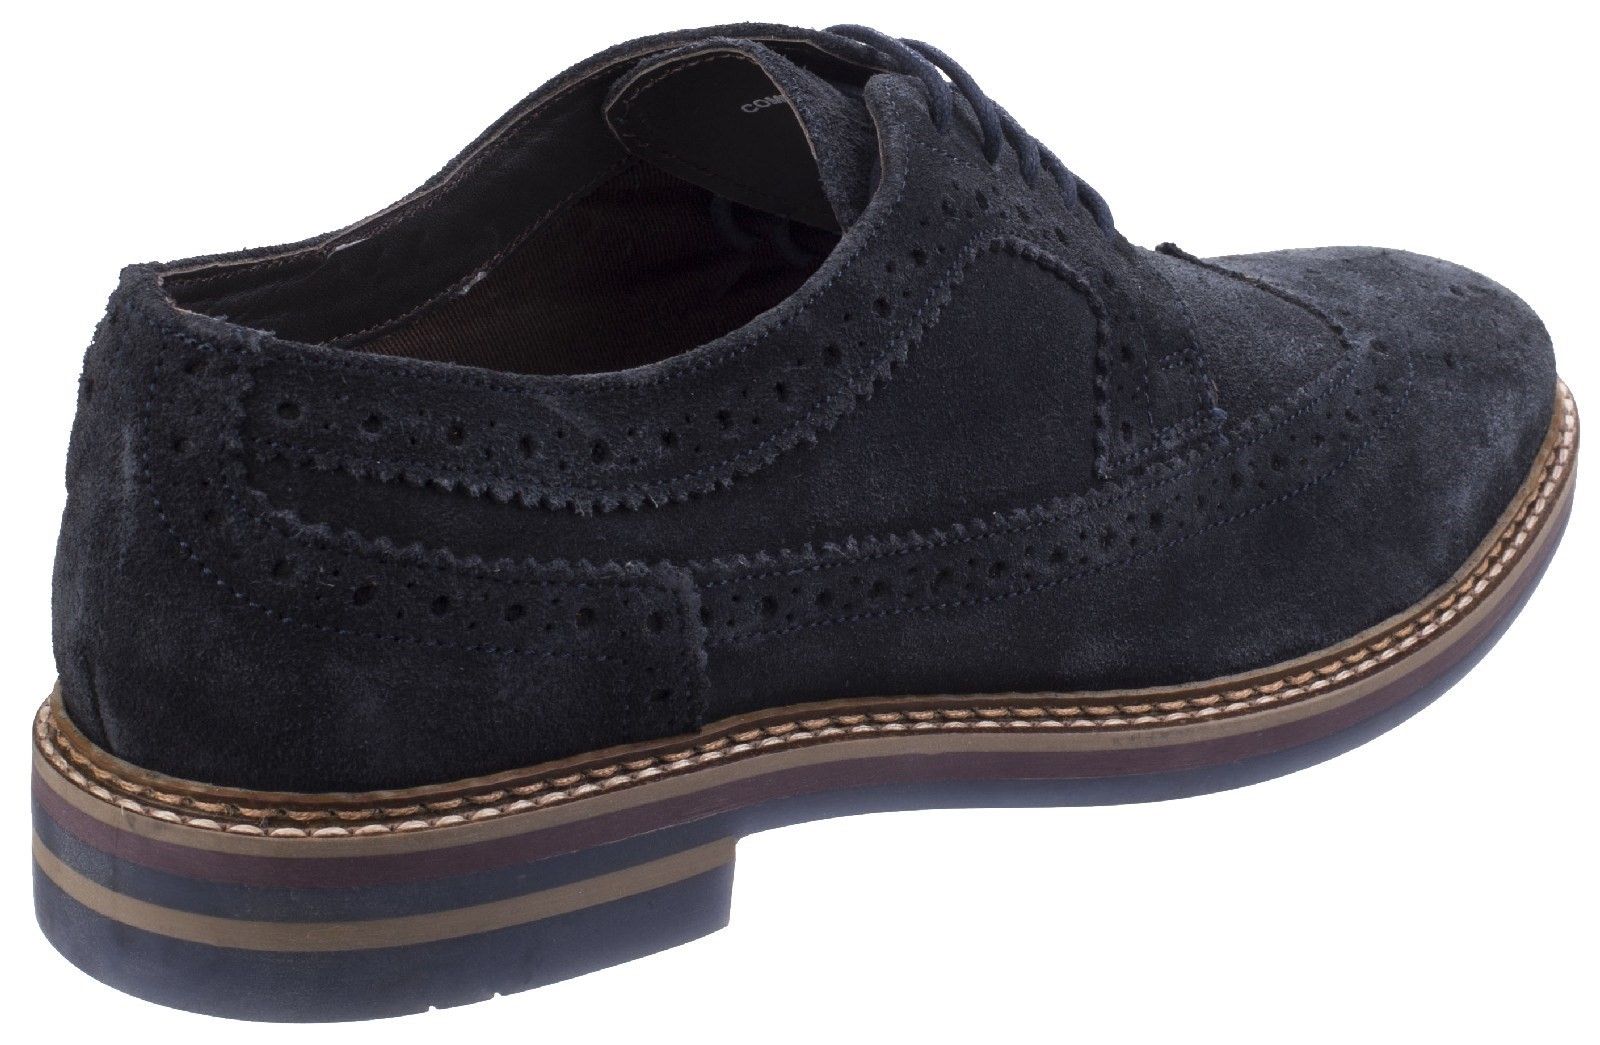 Turner is one of our classic brogues from the Artist range and has been one of the brand's most loved styles of recent seasons. This long wing with a contemporary twist features decorative toe detailing and a traditional wing tip toe cap. High quality suede leather. 
High quality leather lining.